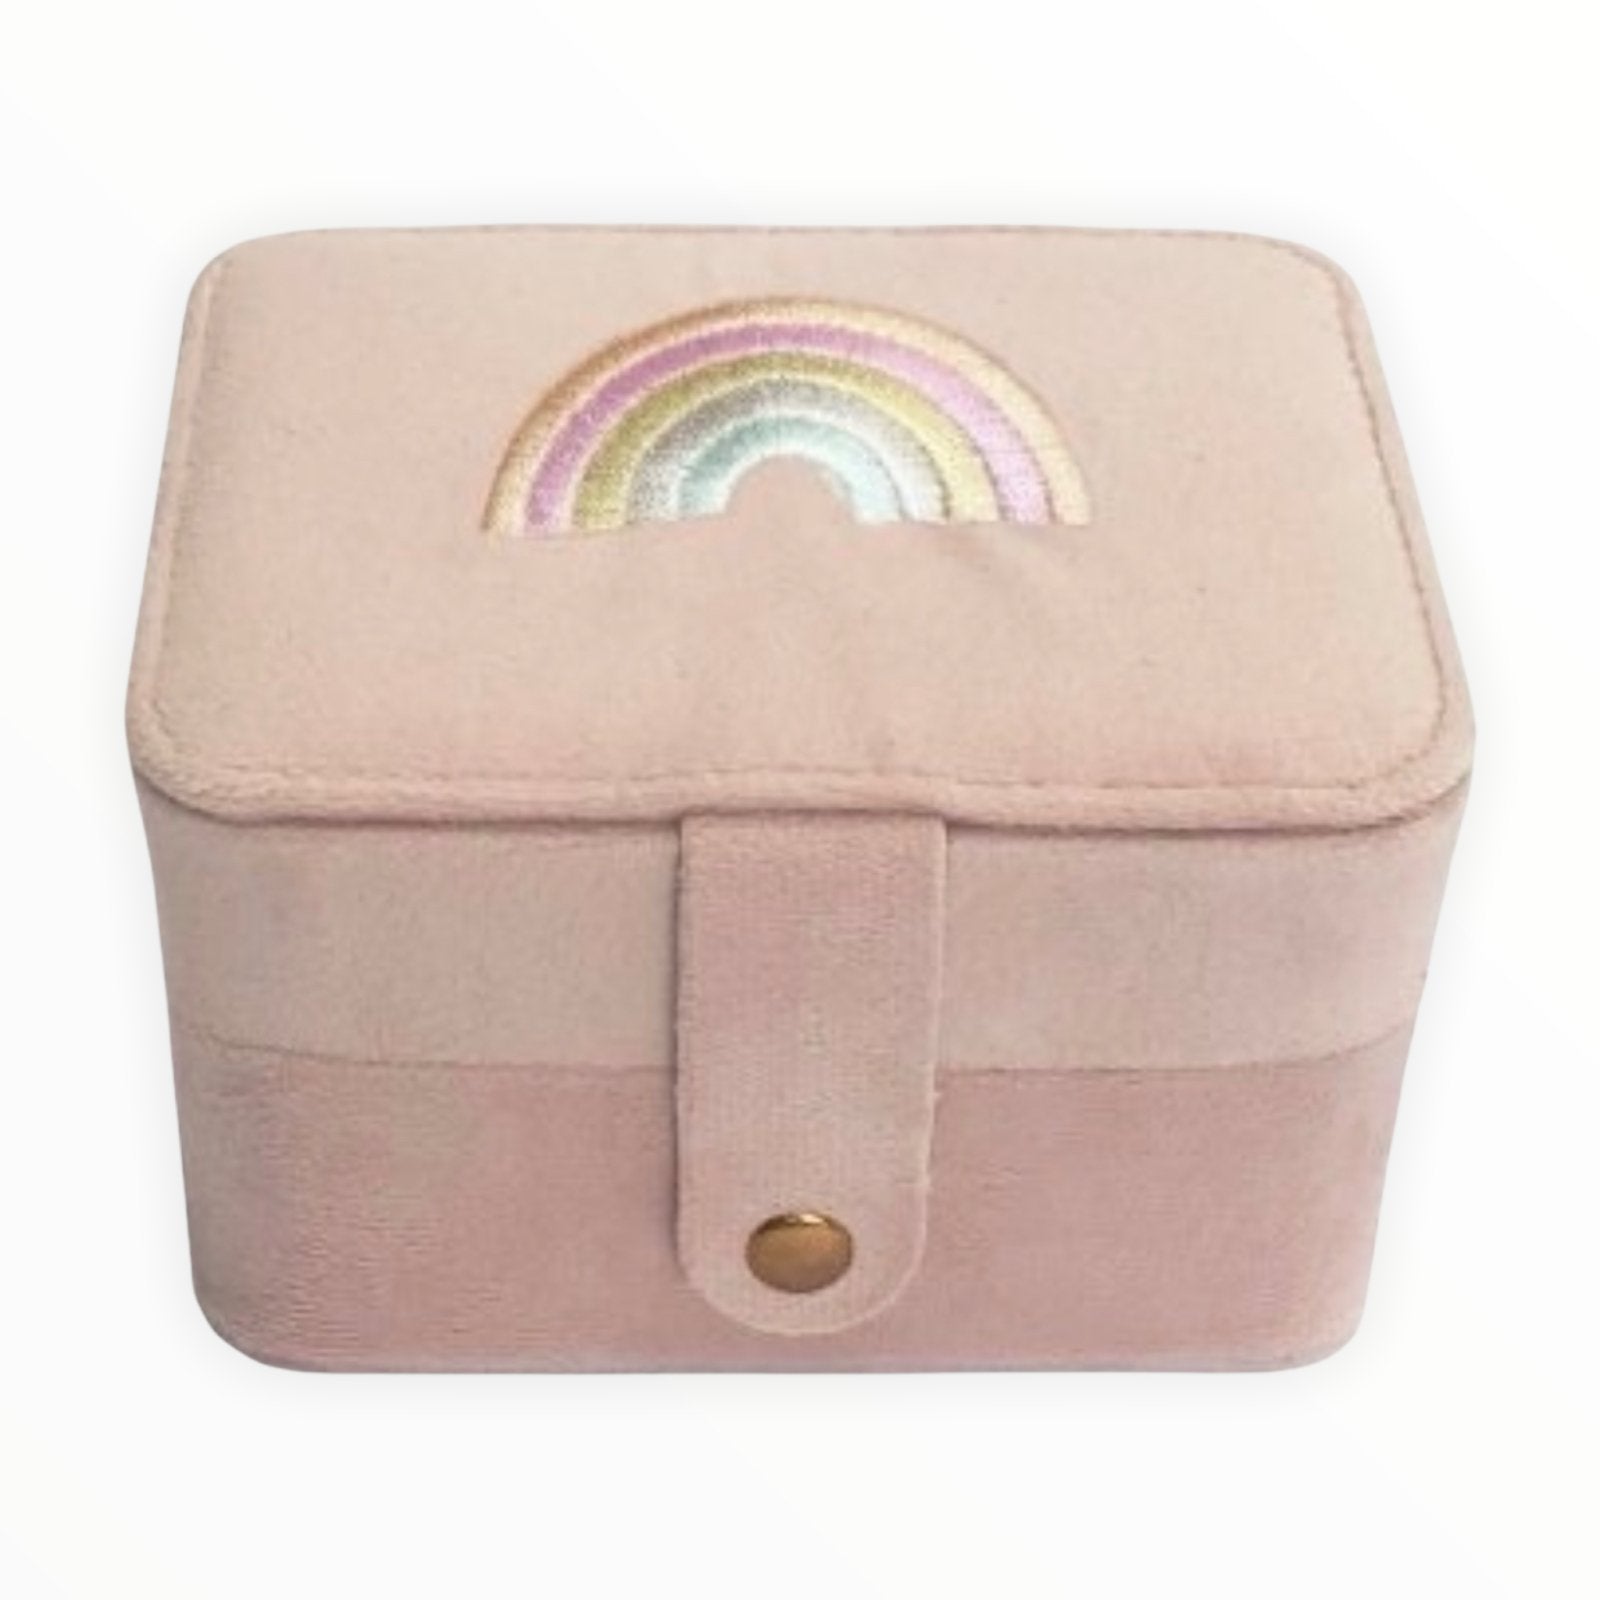 Dreamy Rainbow Jewellery Box find Stylish Fashion for Little People- at Little Foxx Concept Store